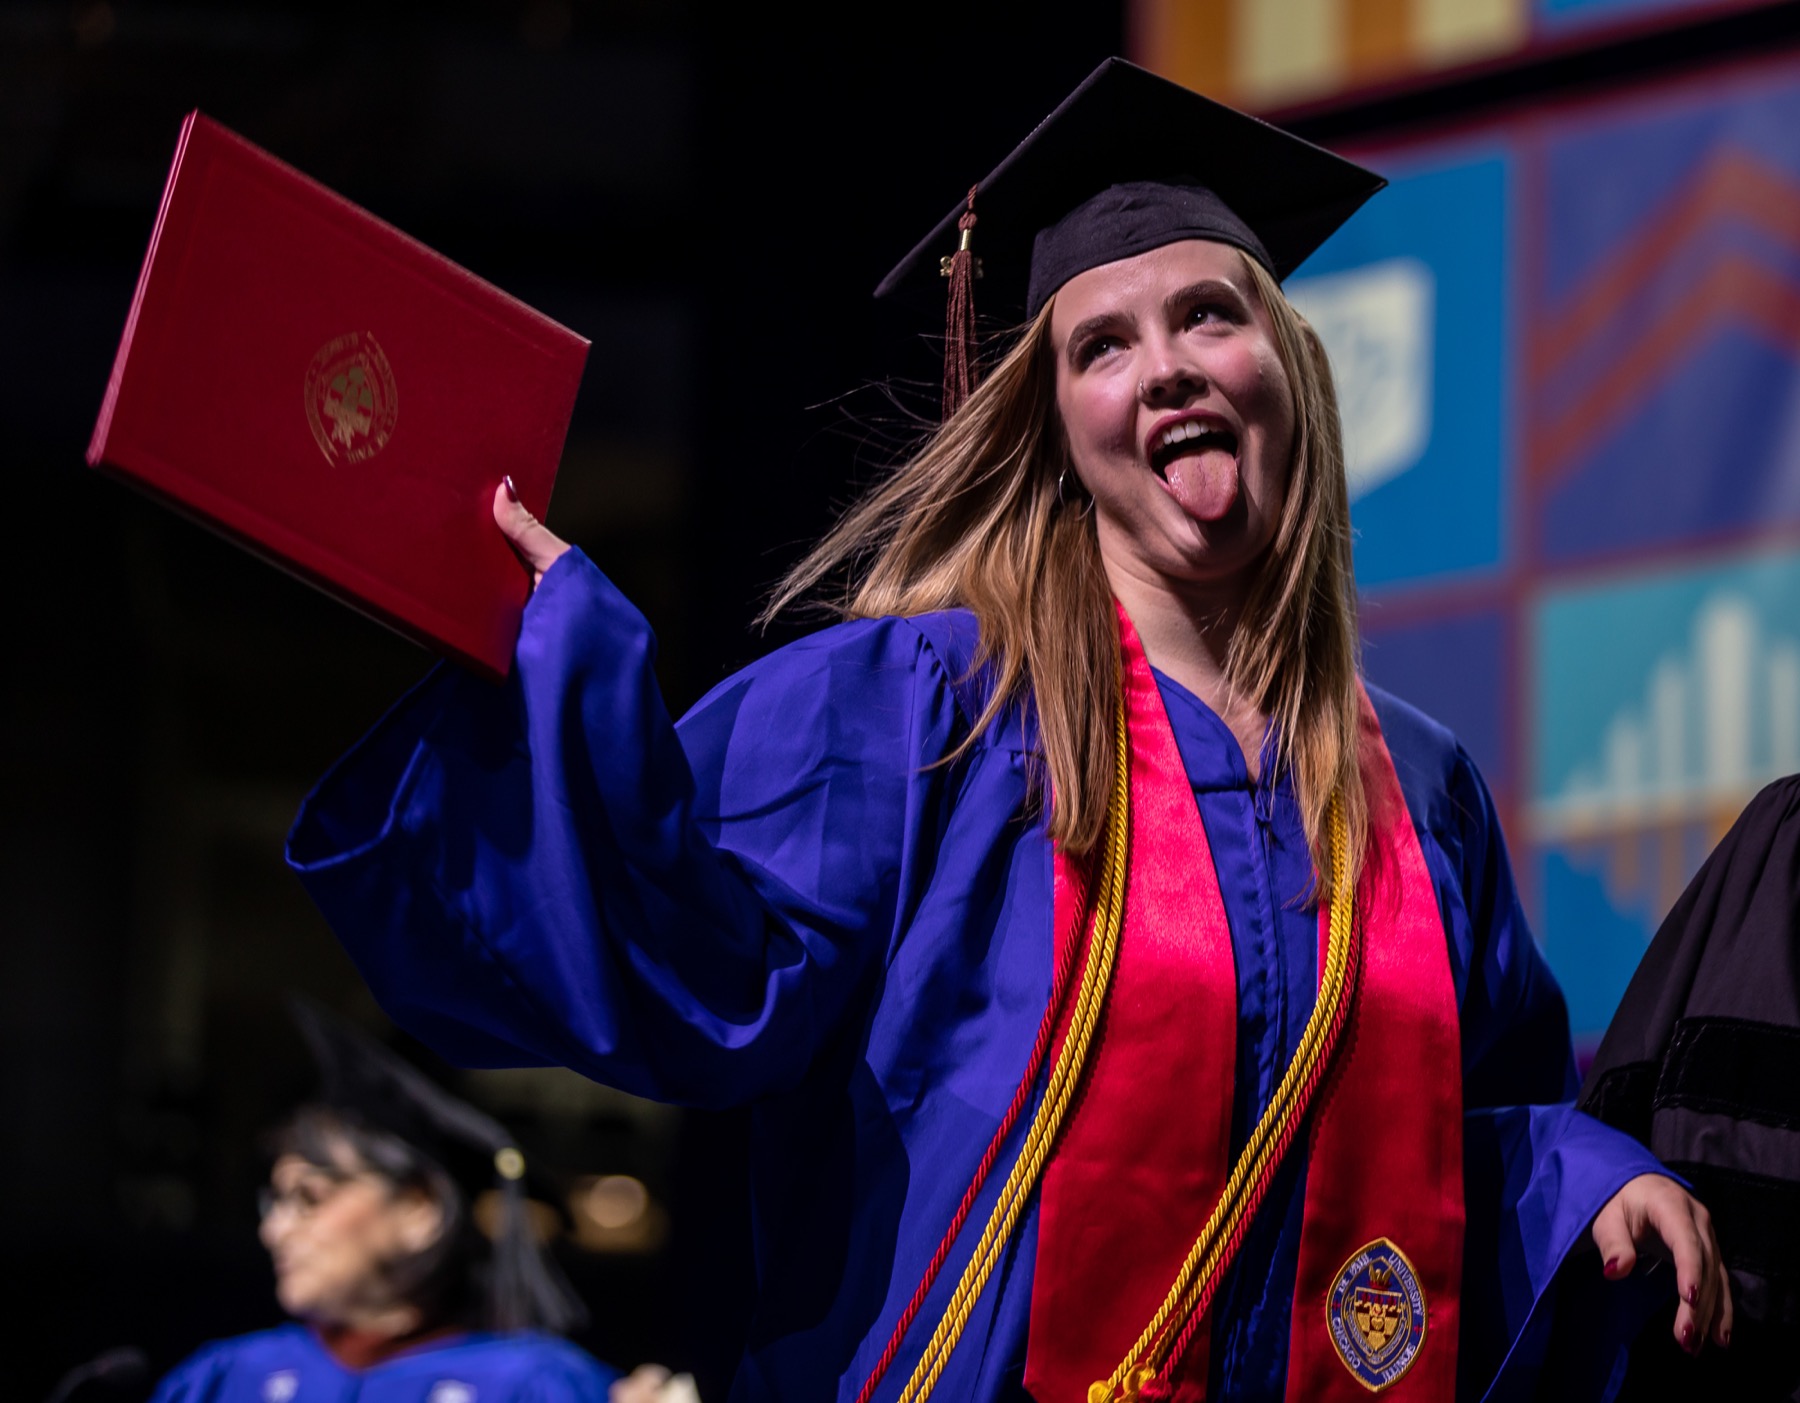 A graduate showed off one of the many emotions of relief and accomplishment after accepting her diploma.